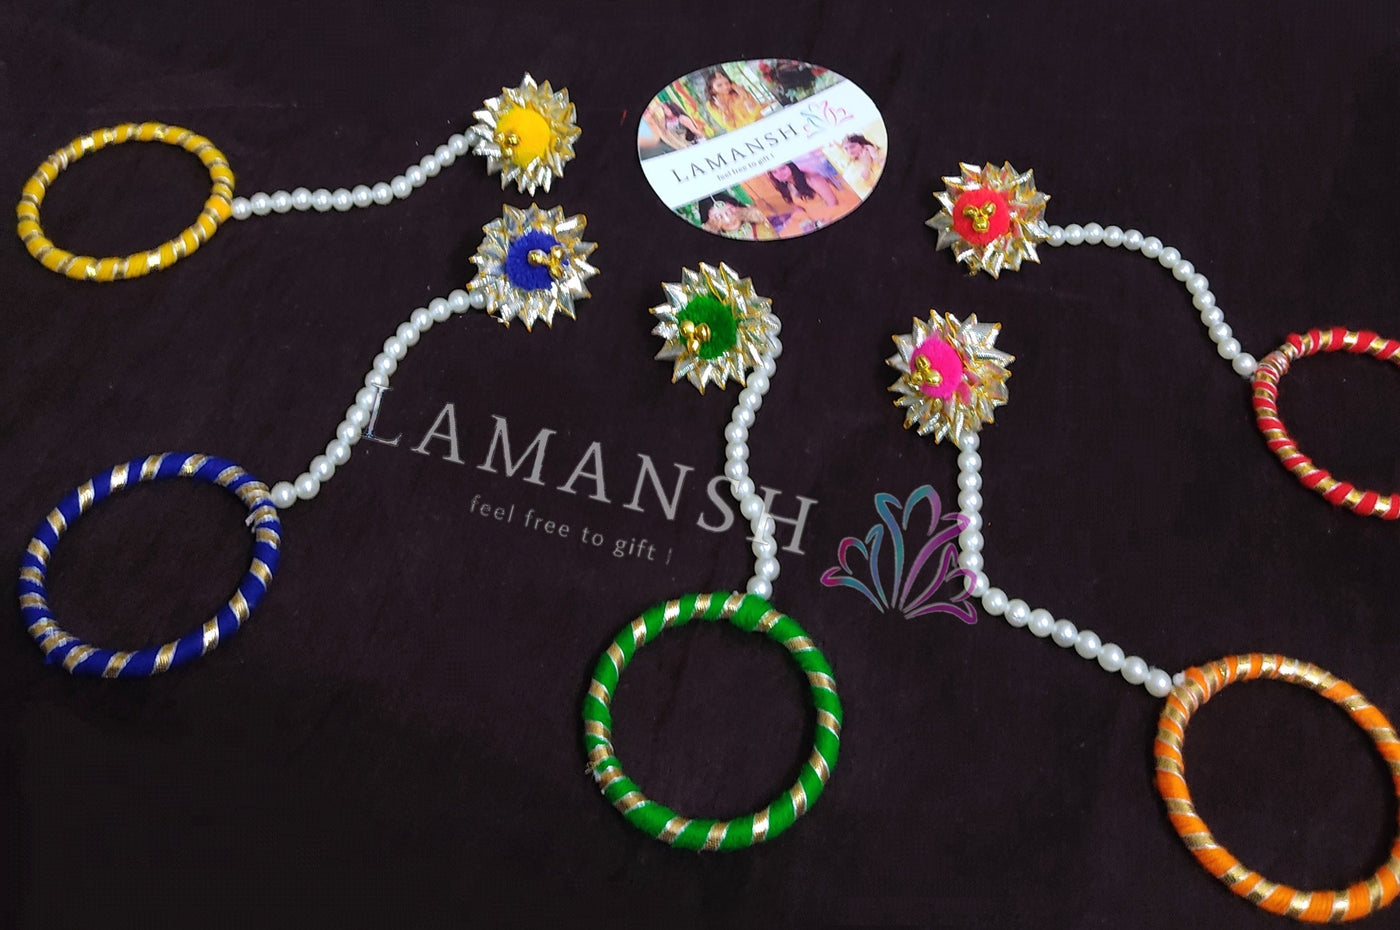 LAMANSH Gota chudi bangles Assorted mix colors / 40 Bangles attached to ring set LAMANSH® Set of 40 Gota Kade Bangle/Bracelets Attached to Ring / Haldi Favours for guests / Pom Pom & Ghungroo Favors for bridesmaid